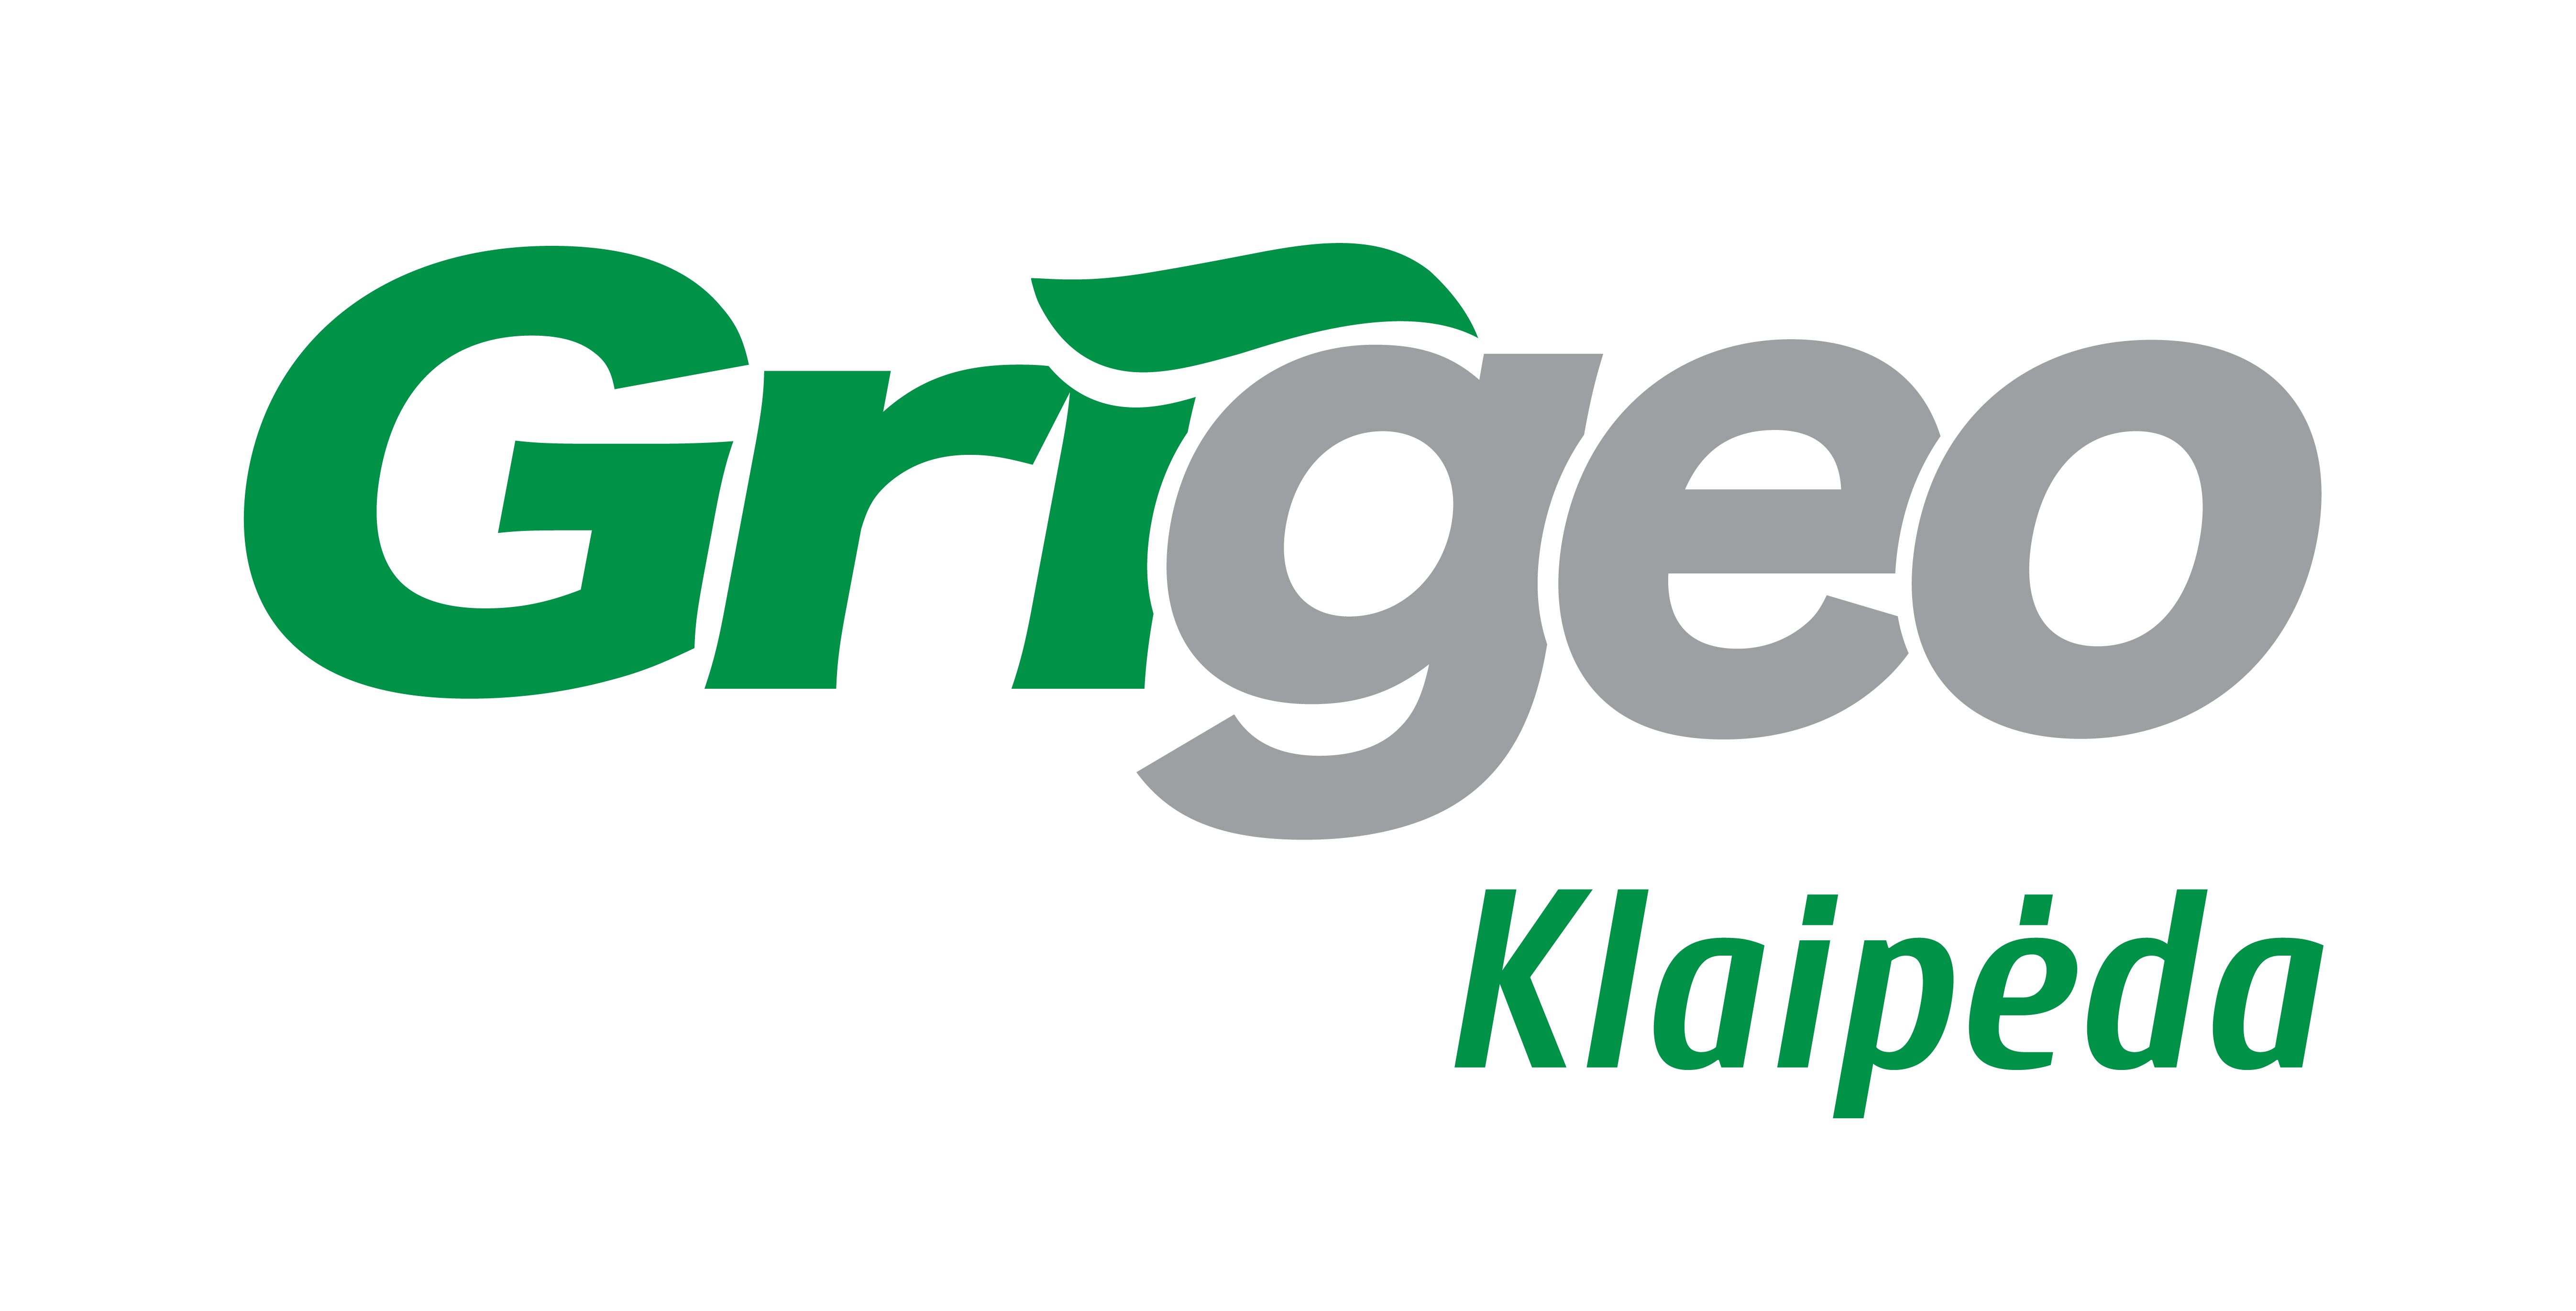 AB Grigeo Klaipėda intends to invest EUR 3.5 million in environmental projects